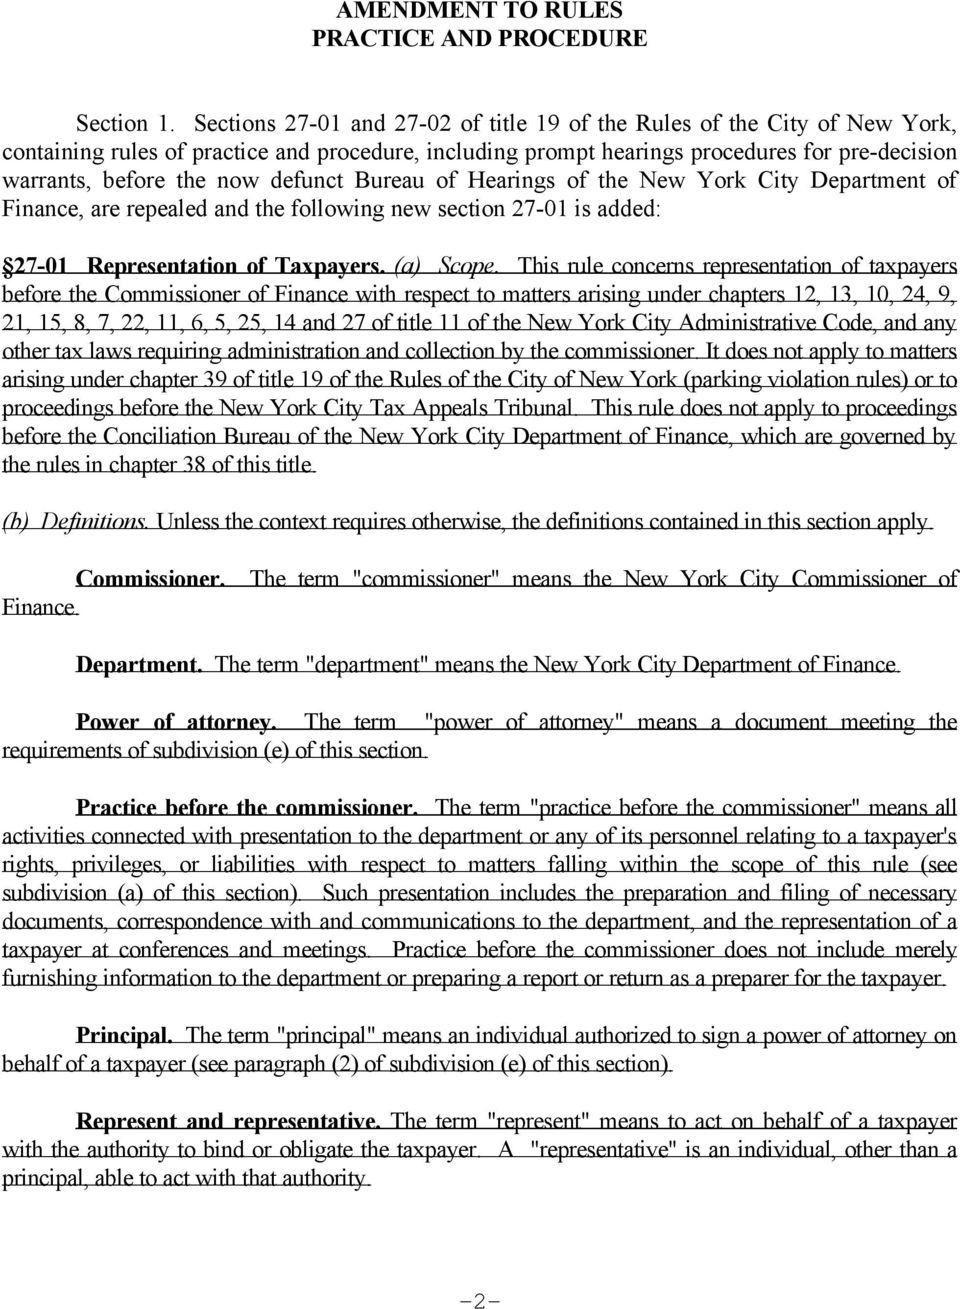 defunct Bureau of Hearings of the New York City Department of Finance, are repealed and the following new section 27-01 is added: 27-01 Representation of Taxpayers. (a) Scope.